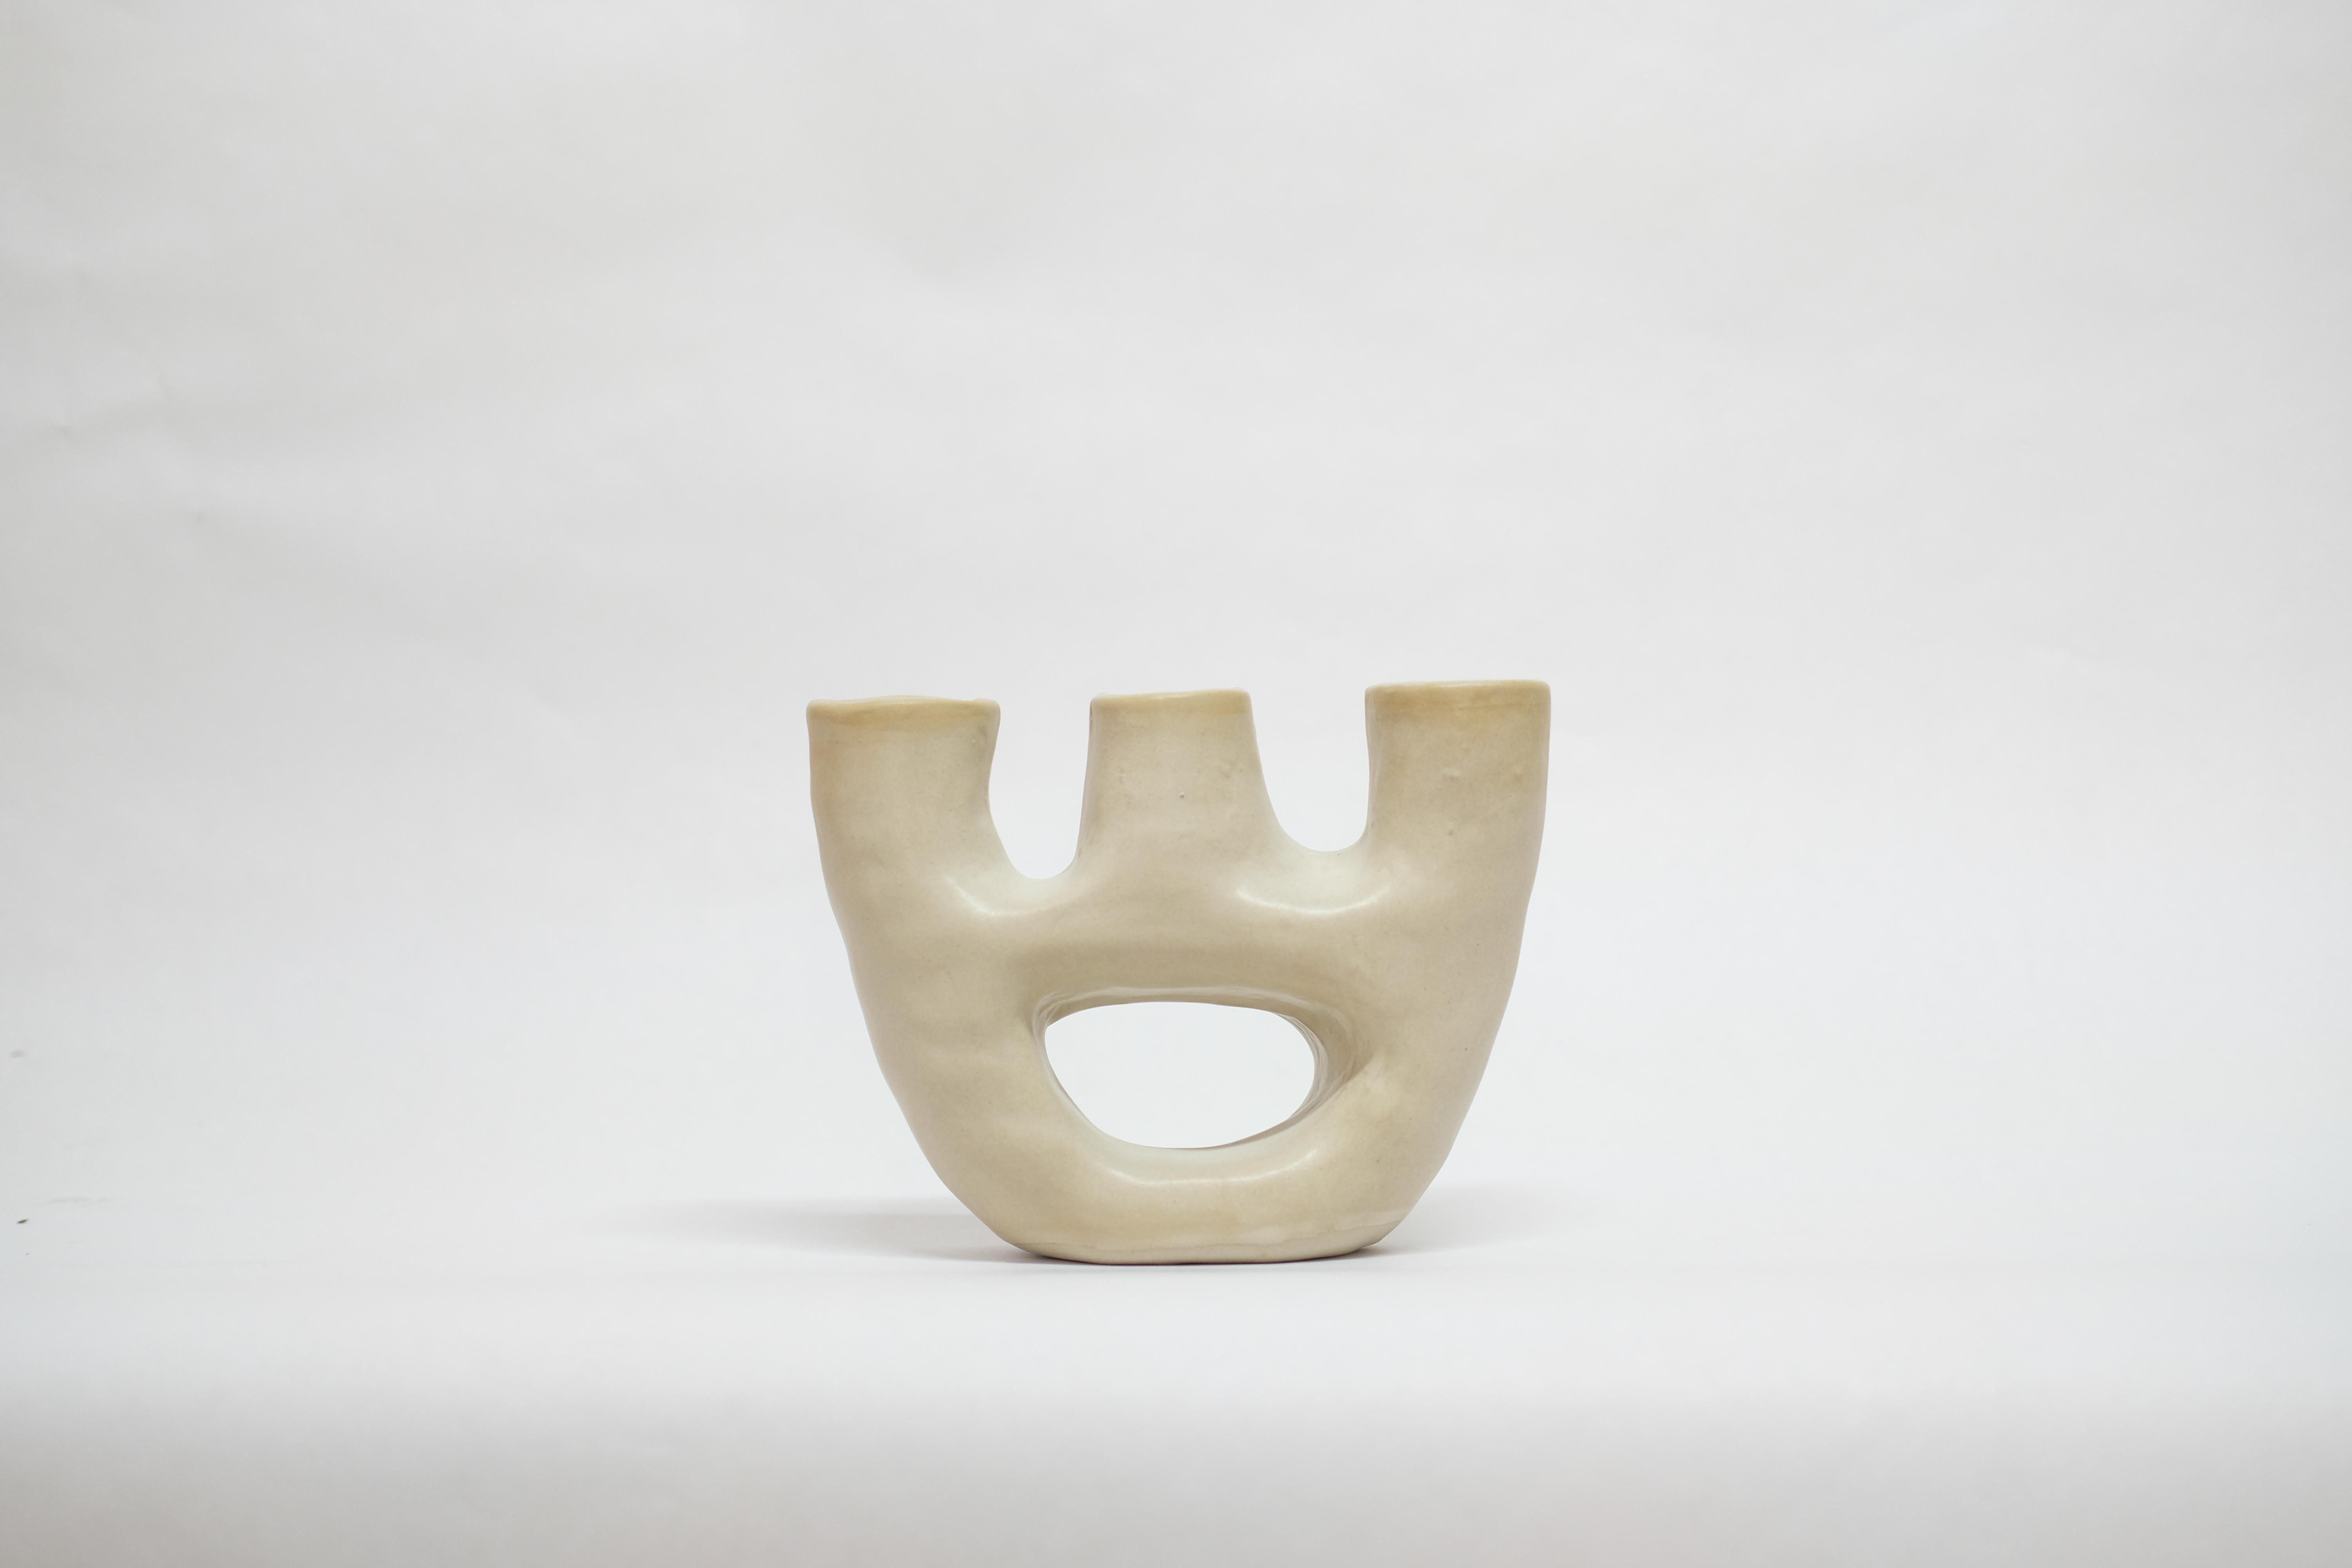 Gravedad stoneware vase by Camila Apaez
One of a kind
Materials: Stoneware
Dimensions: 16 x 15 x 6 cm
Options: White bone, butter milk

This year has been shaped by the topographies of our homes and the uncertainty of our time. We have found